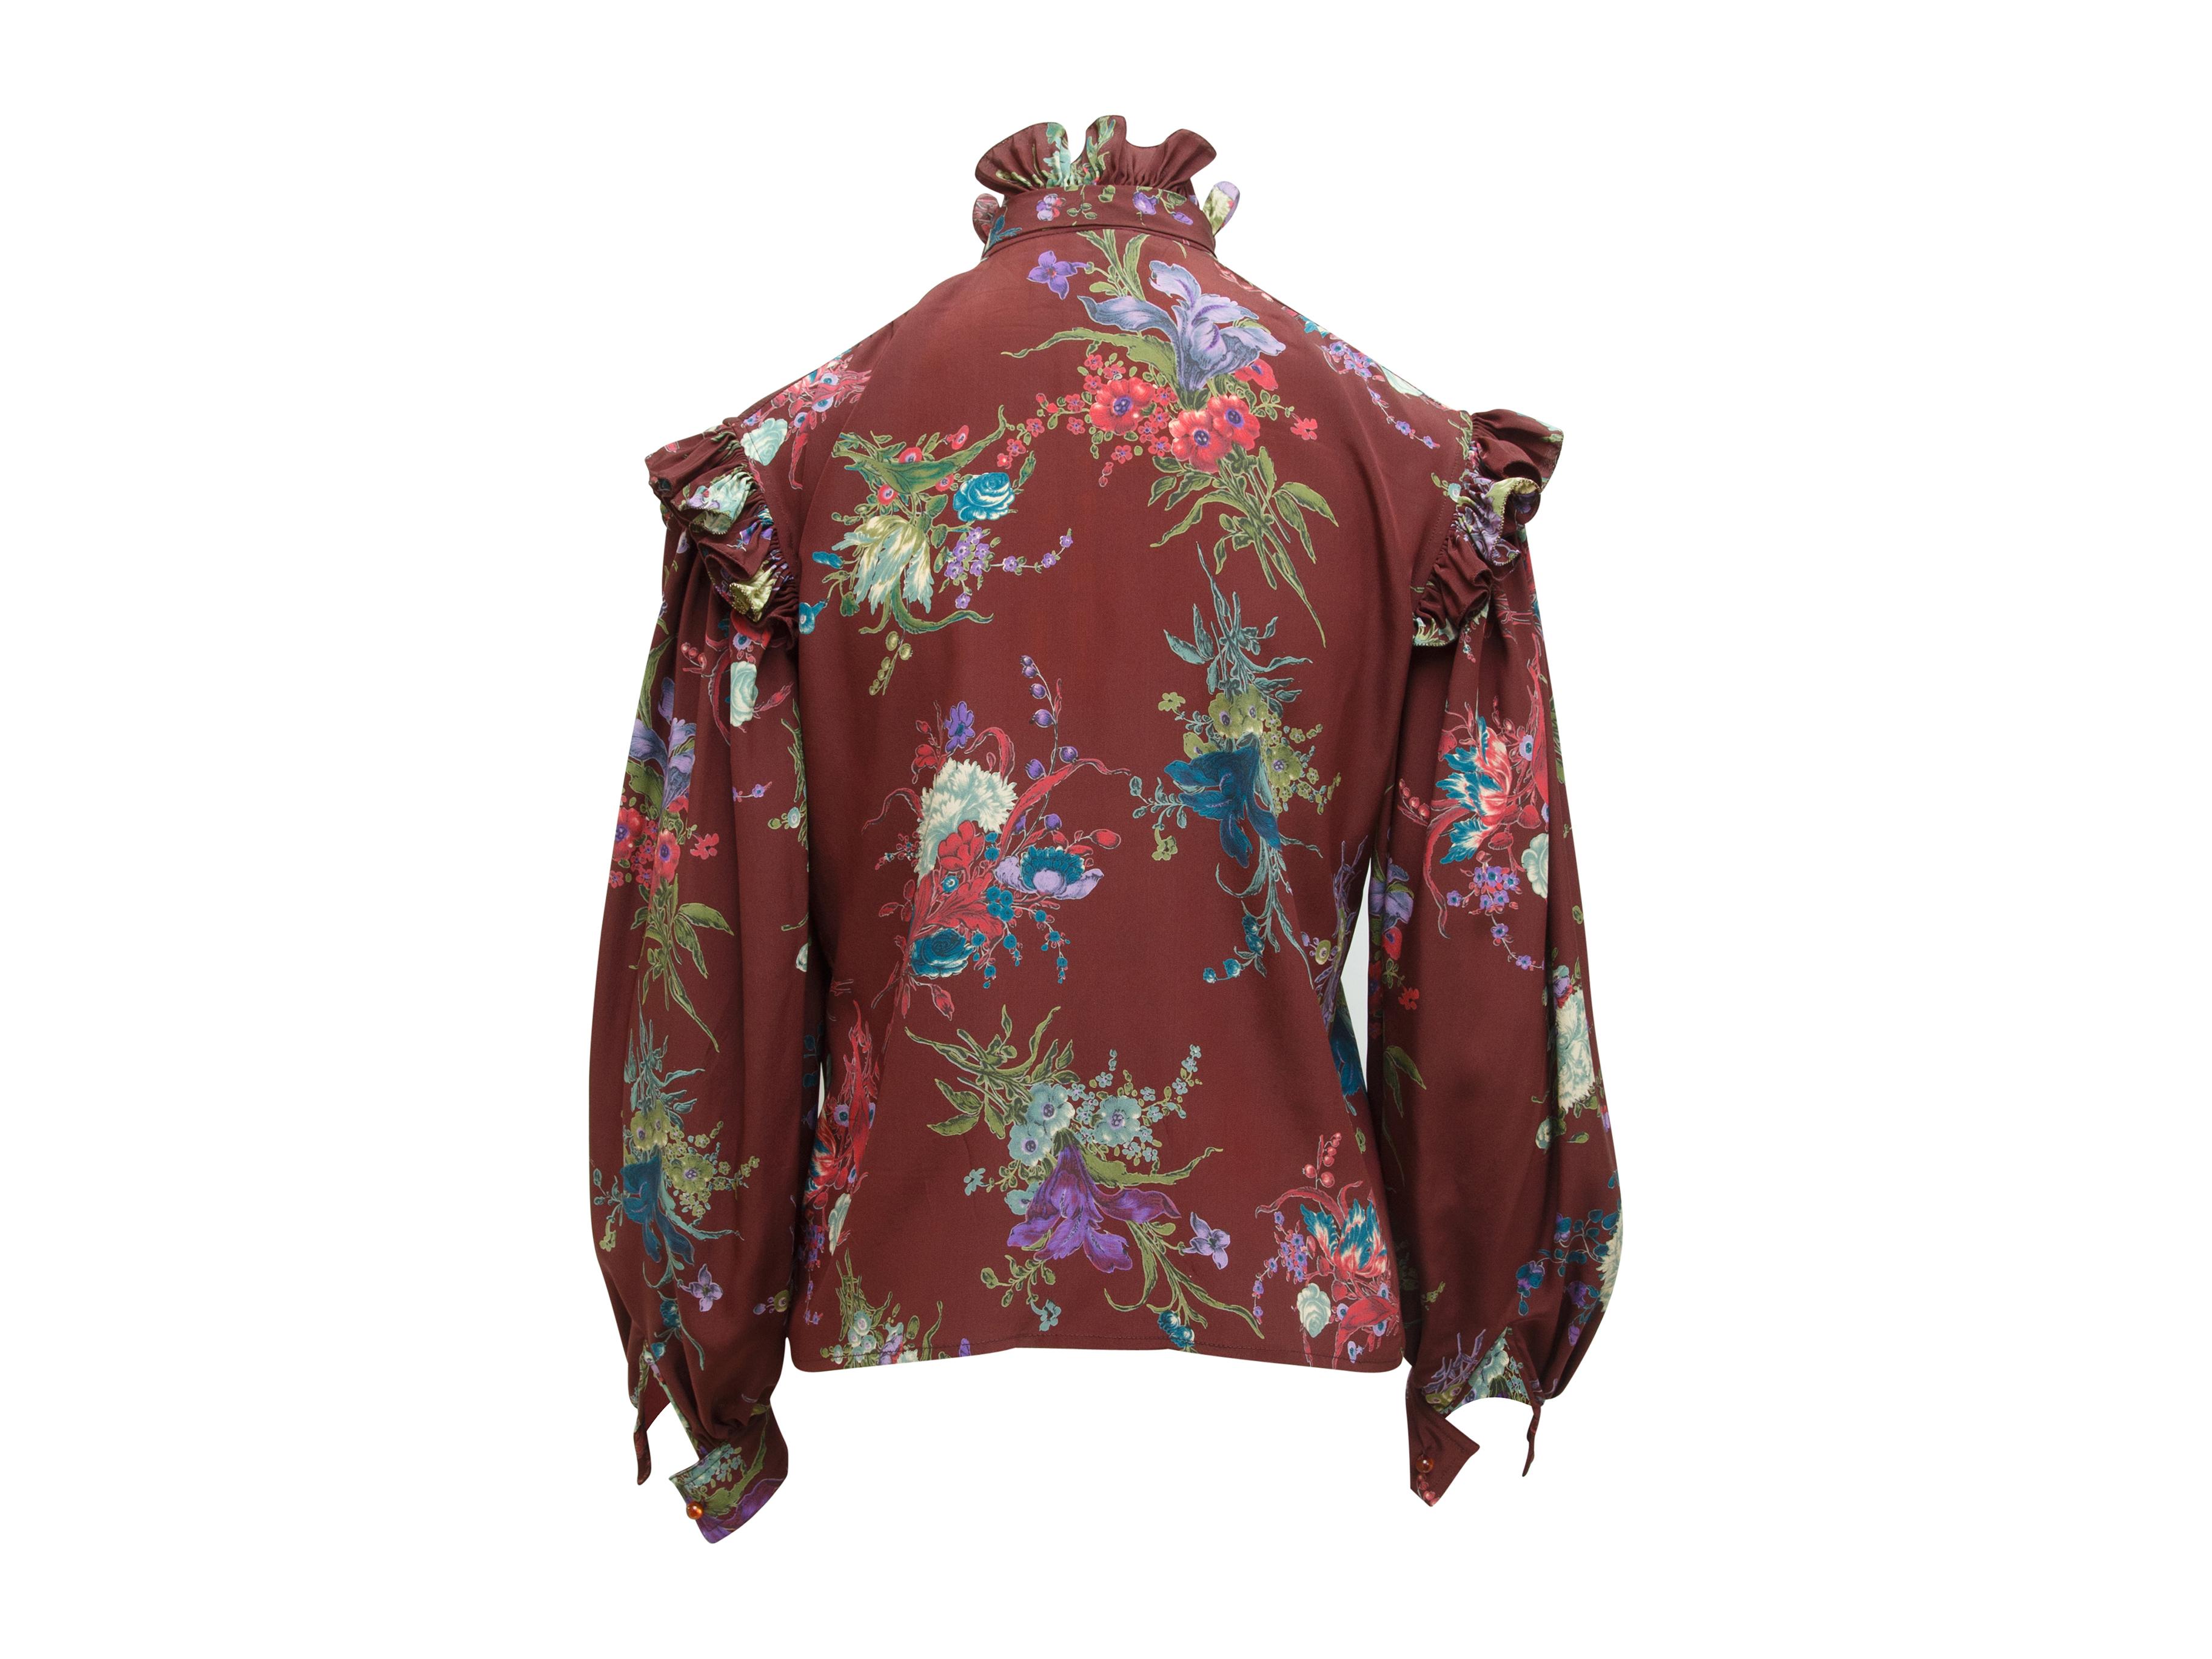 Product details:  Vintage multicolor floral-printed silk blouse by Ungaro.  Ruffled stand collar with tie.  Long sleeves.  Single button cuffs.  Button-front closure.  39